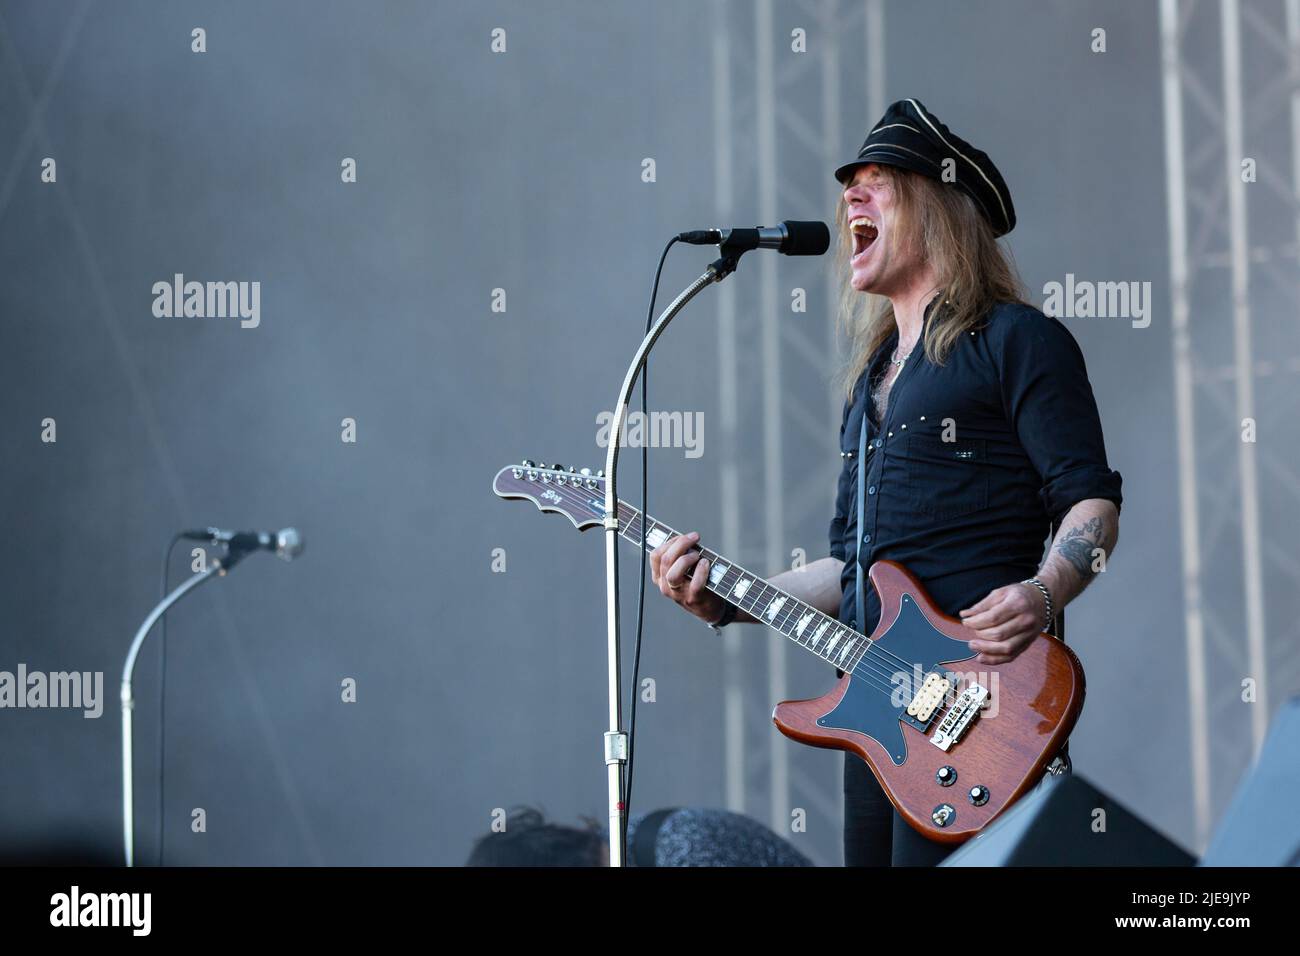 Oslo, Norway. 24th, June 2022. The Swedish hard rock band The Hellacopters performs a live concert during the Norwegian music festival Tons of Rock 2022 in Oslo. Here vocalist and guitarist Nicke Andersson is seen live on stage. (Photo credit: Gonzales Photo - Per-Otto). Stock Photo